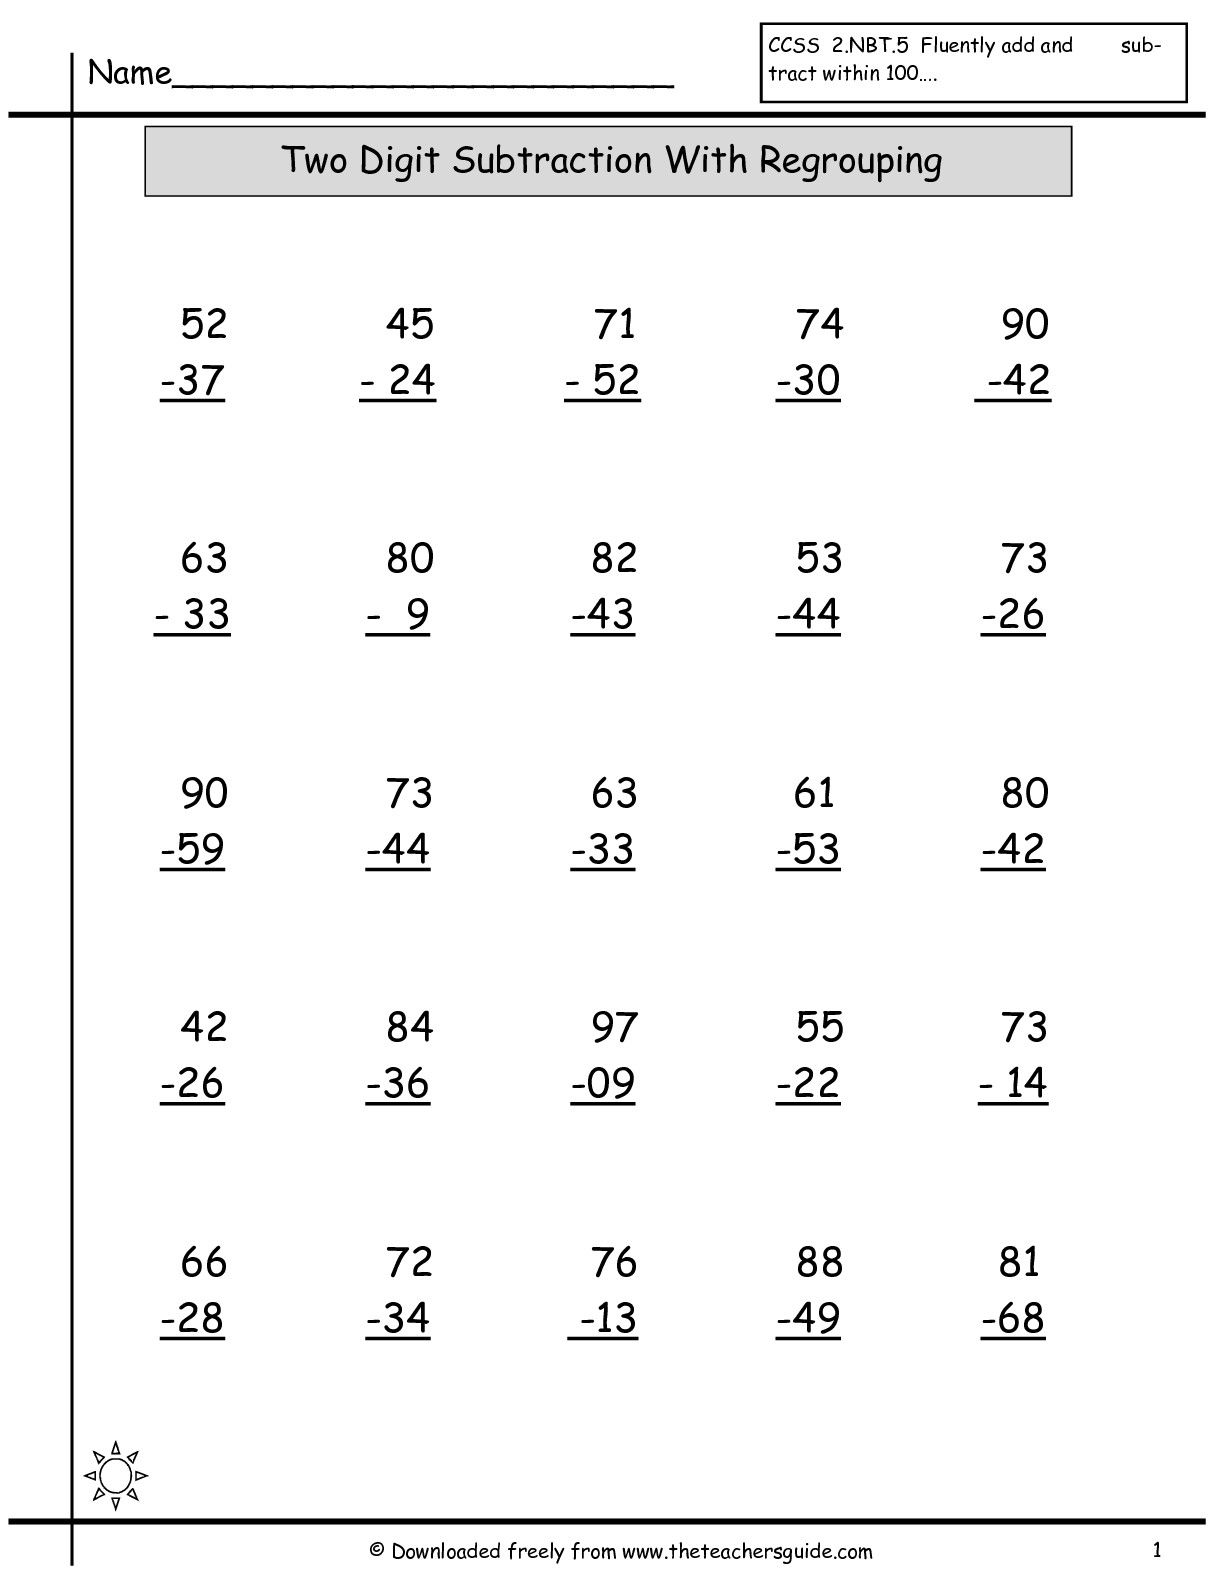 15-best-images-of-adding-simple-numbers-worksheet-valentine-s-day